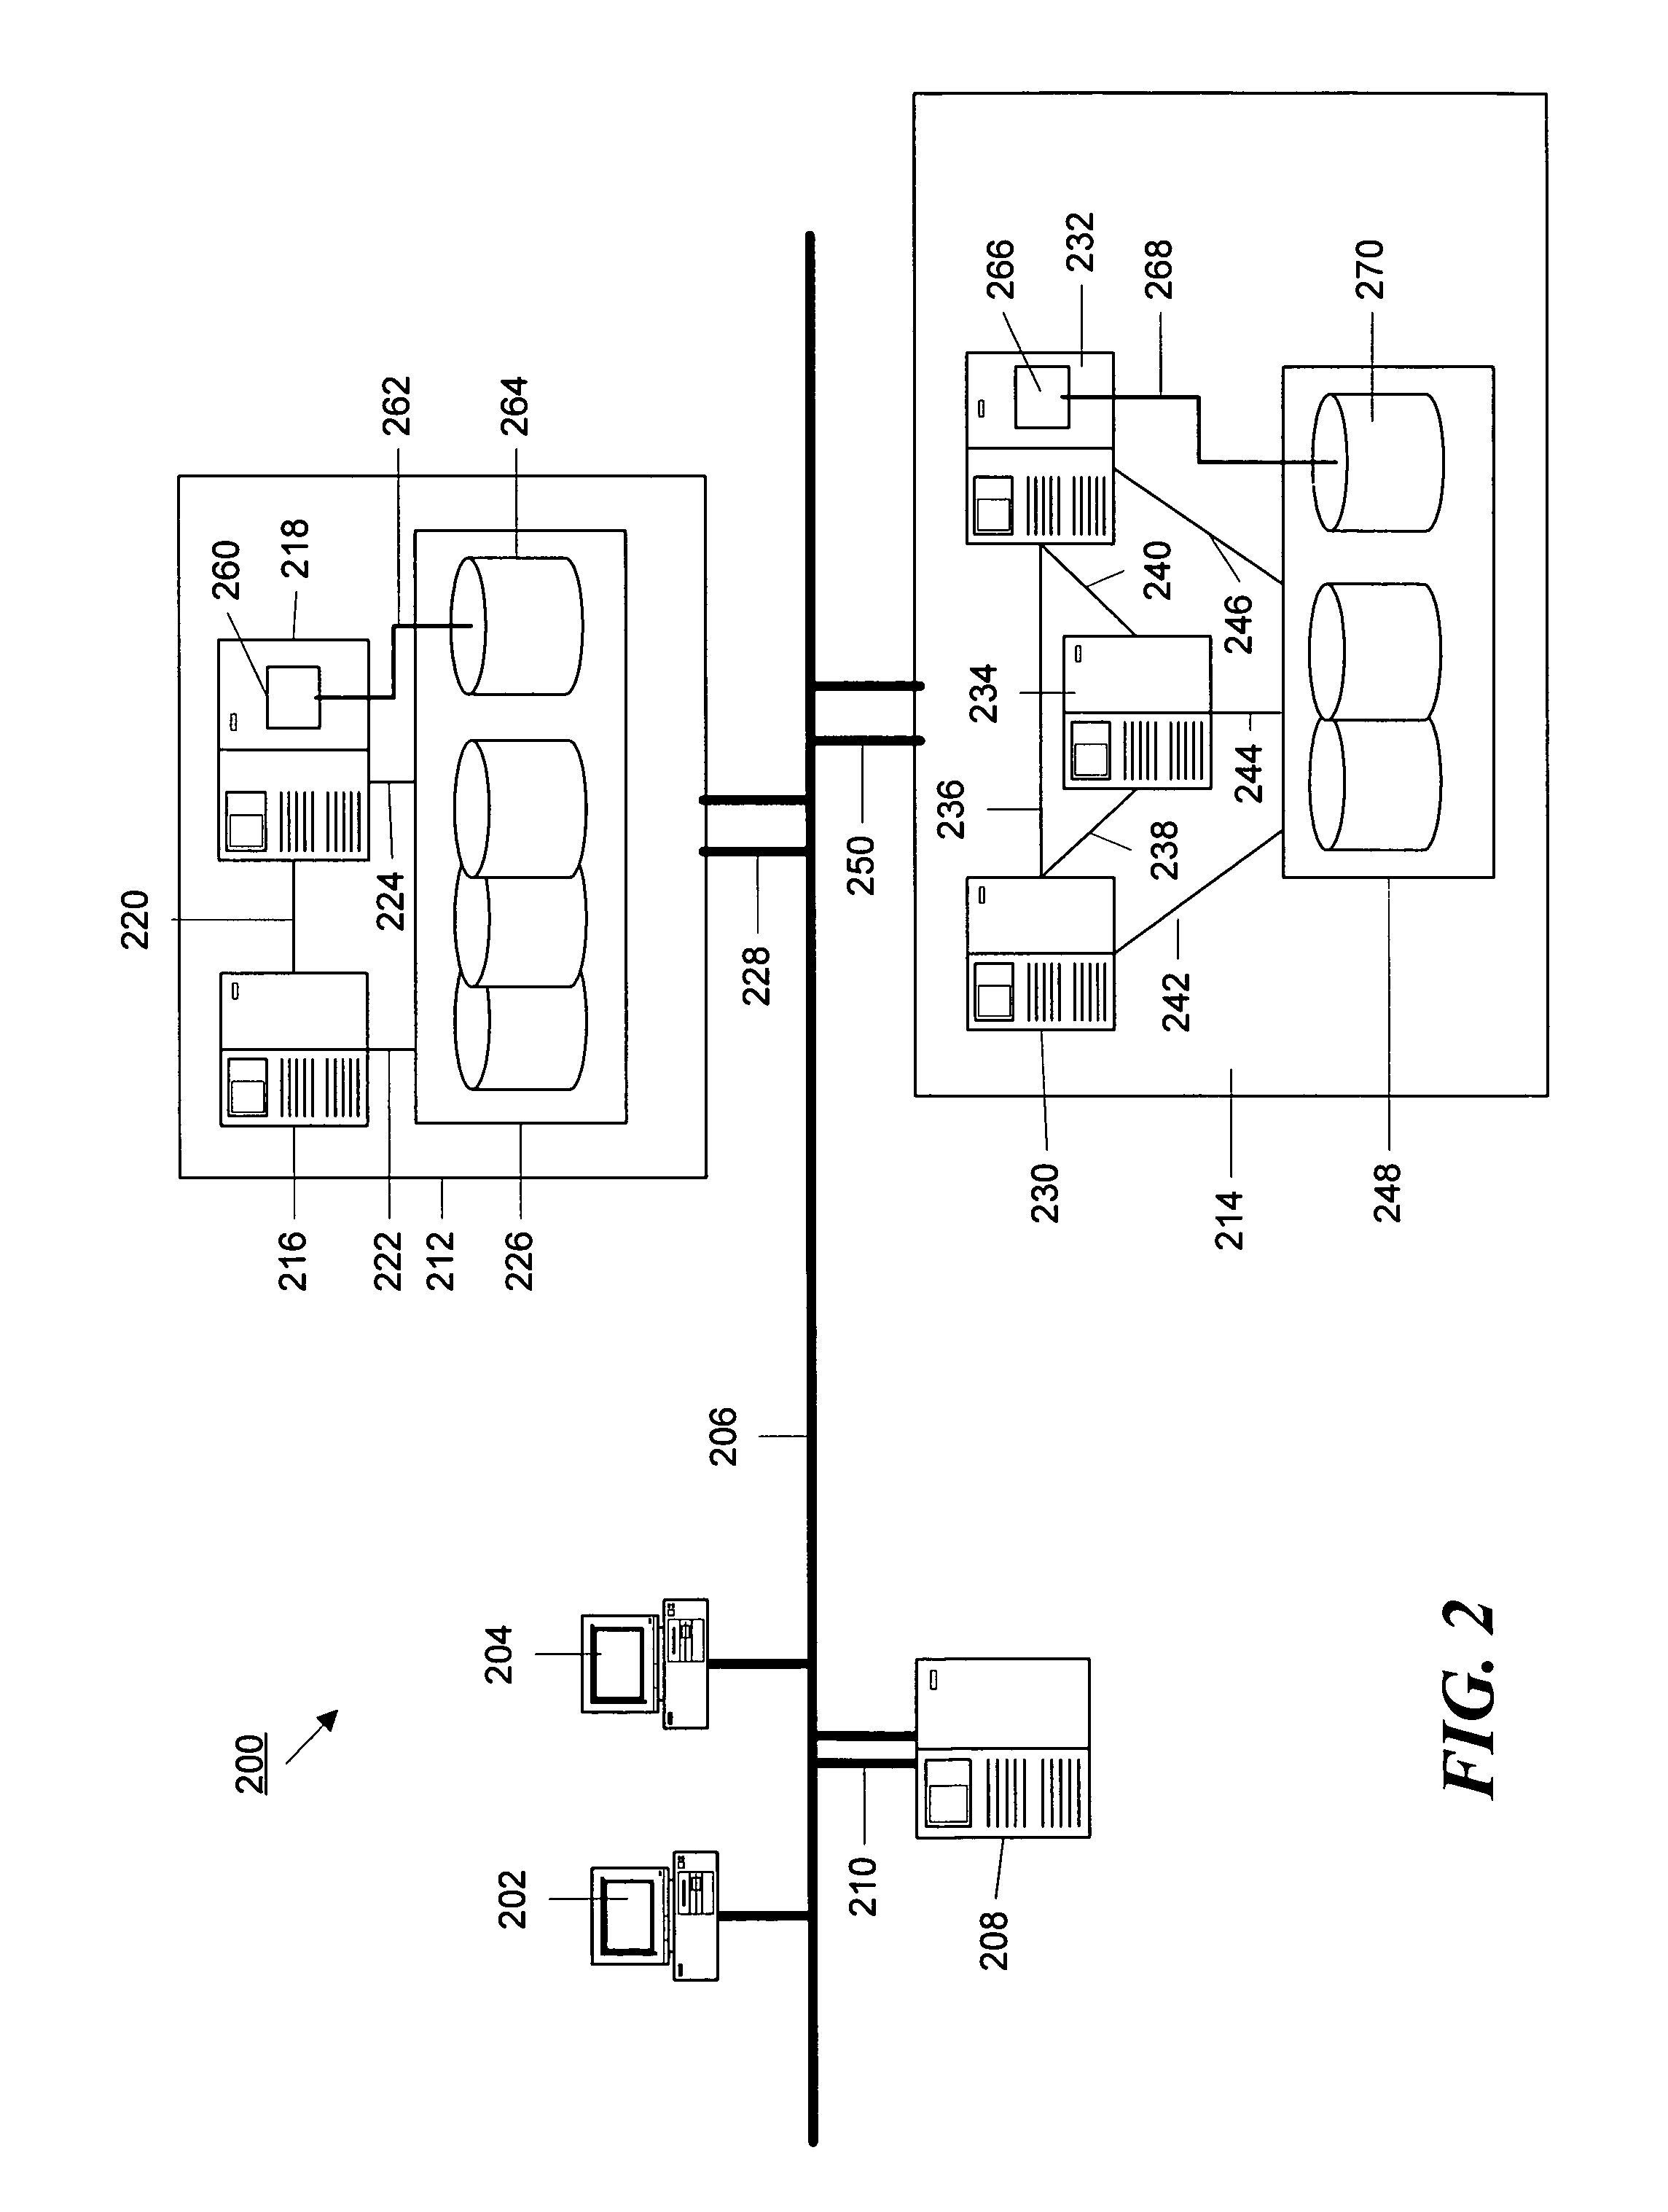 Method and apparatus for maintaining an accurate inventory of storage capacity in a clustered data processing system